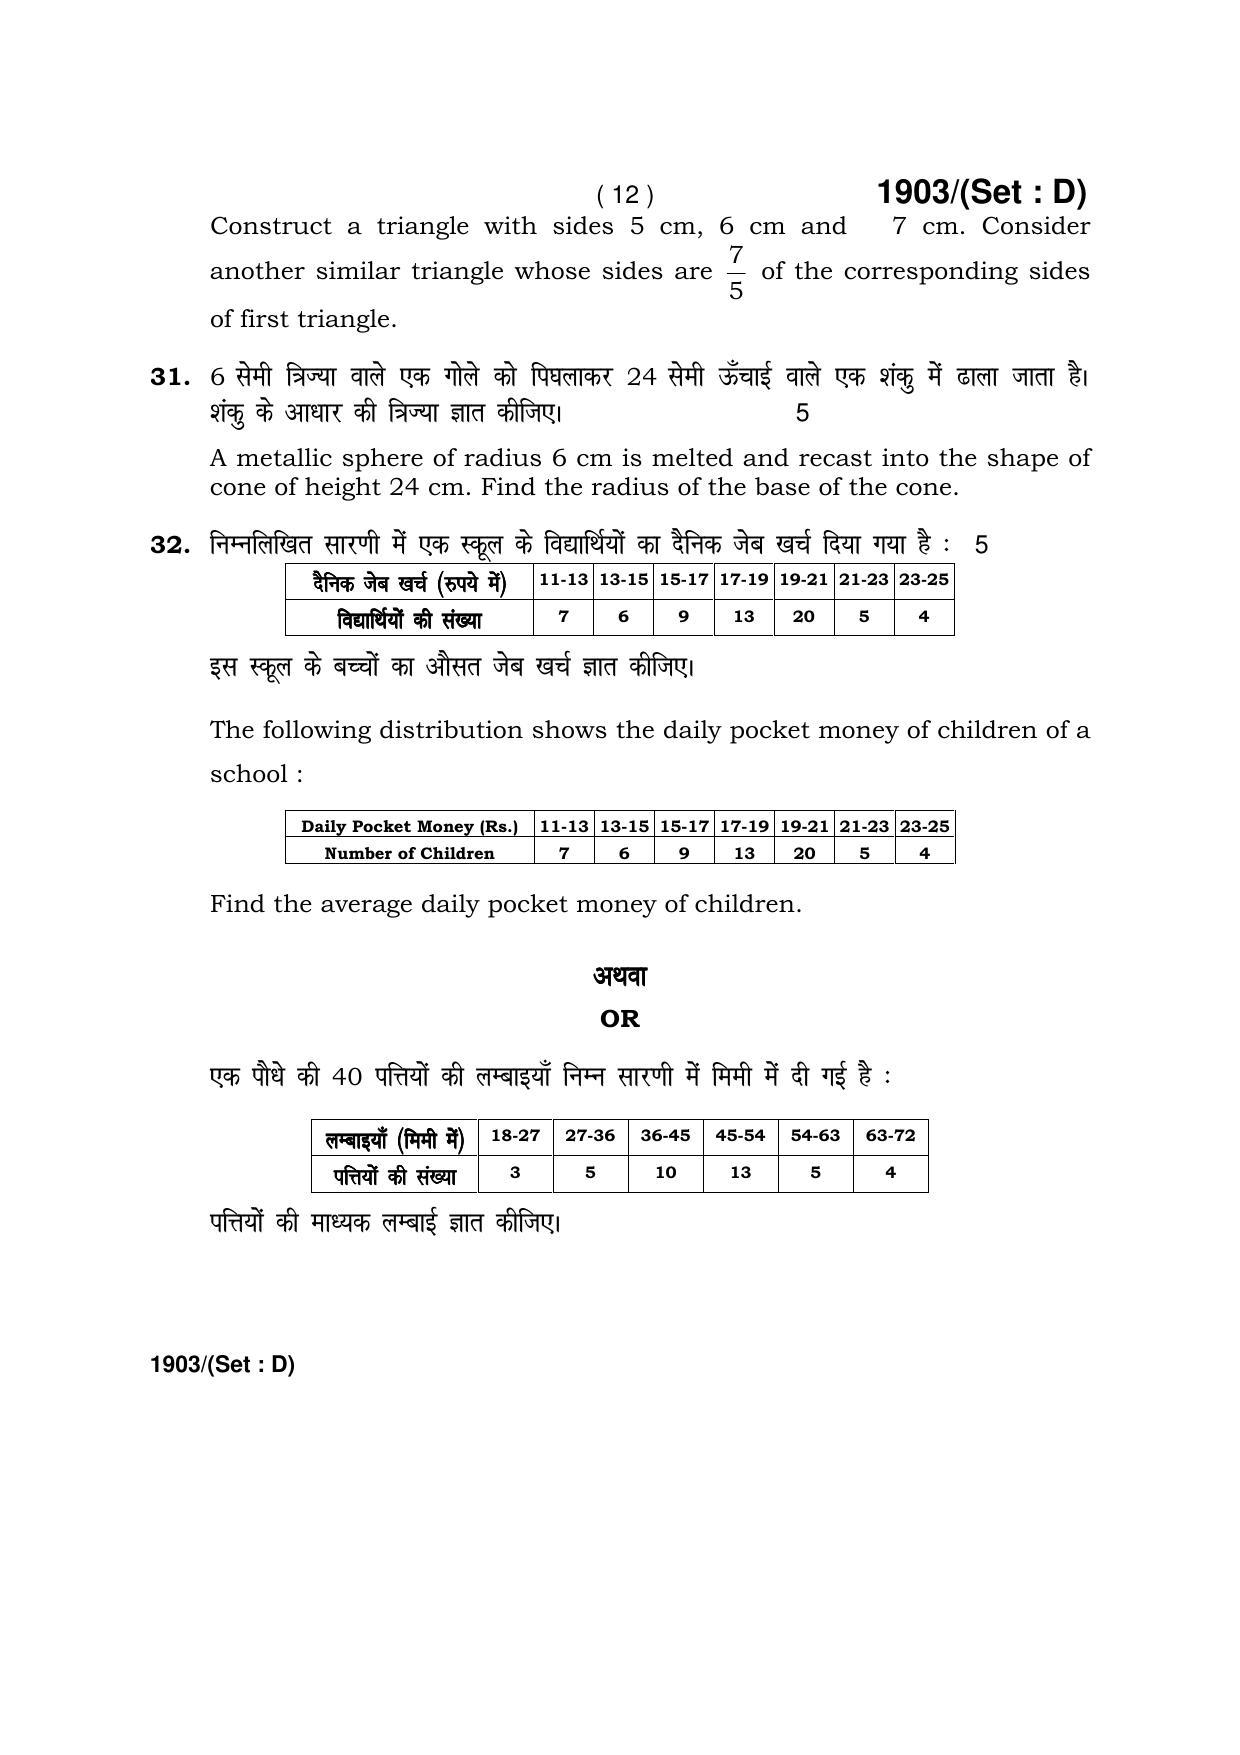 Haryana Board HBSE Class 10 Mathematics -D 2017 Question Paper - Page 12